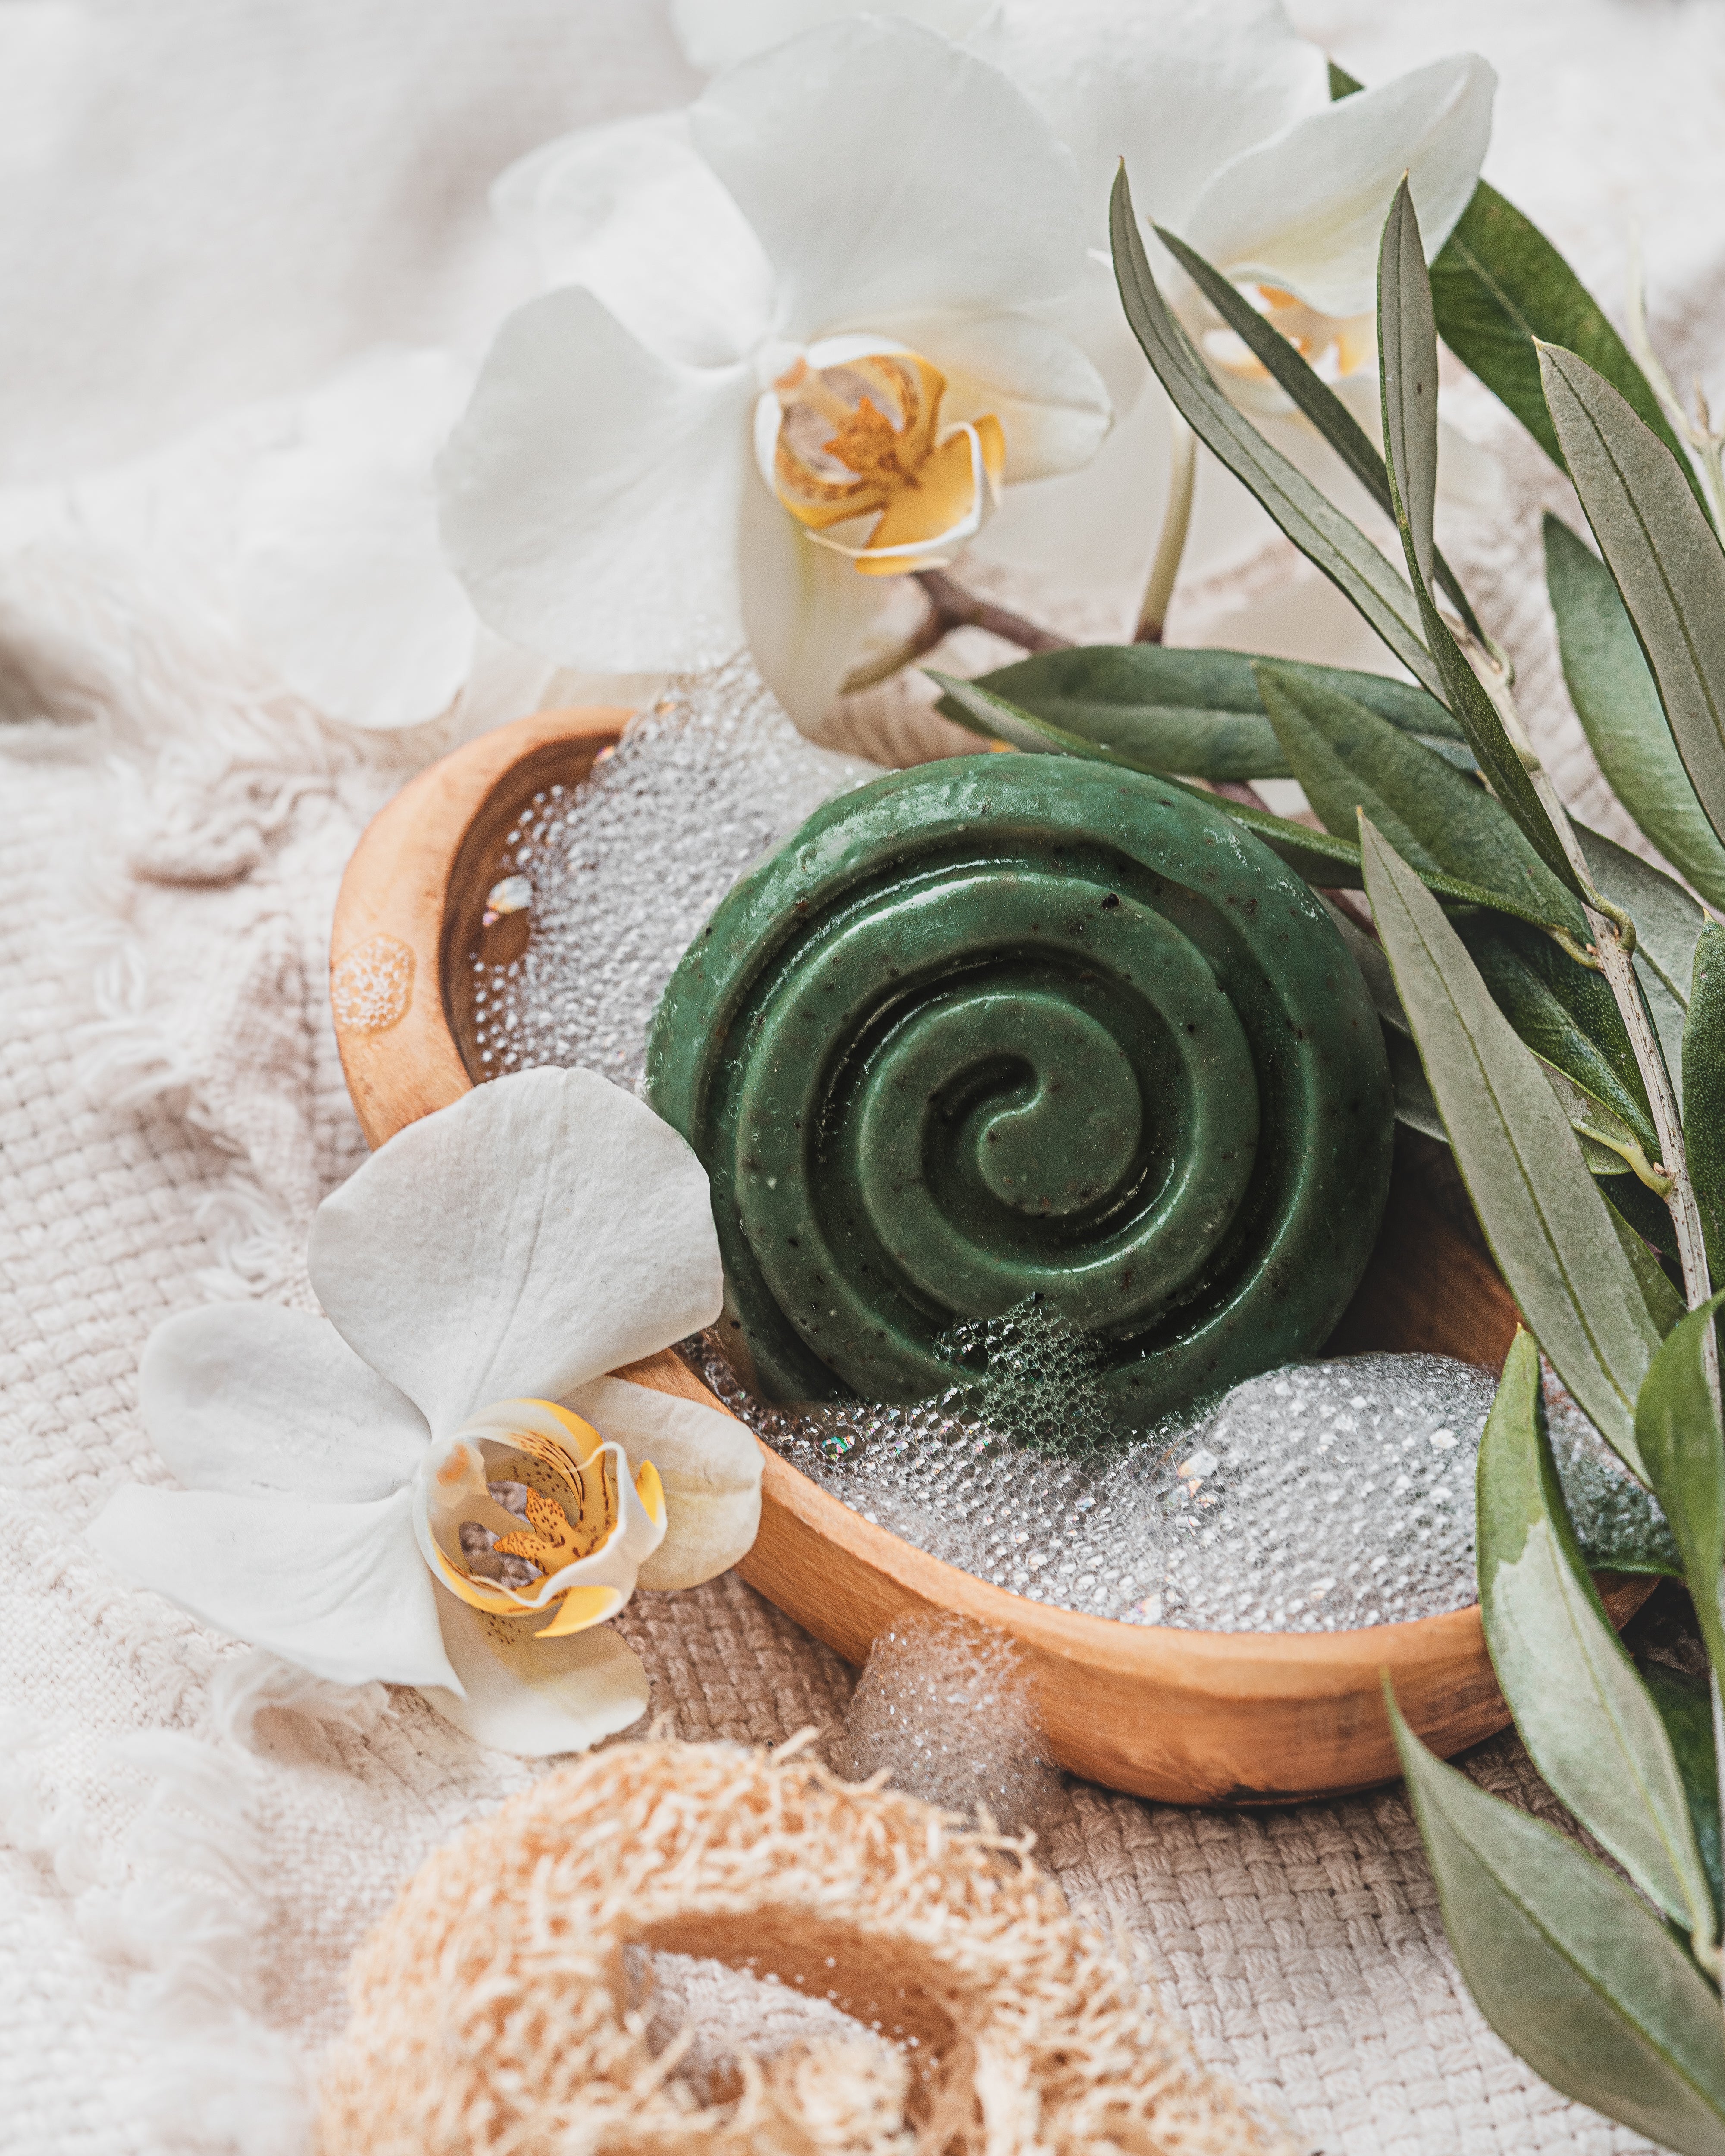 The plant-based natural oils and the heavenly fragrance make this soap so good for your skin. It will help improve the skin's ability to retain moisture. Handmade, natural, vegan, palm and plastic free soap bars.  Handgemaakte, natuurlijke zepen, millieuw